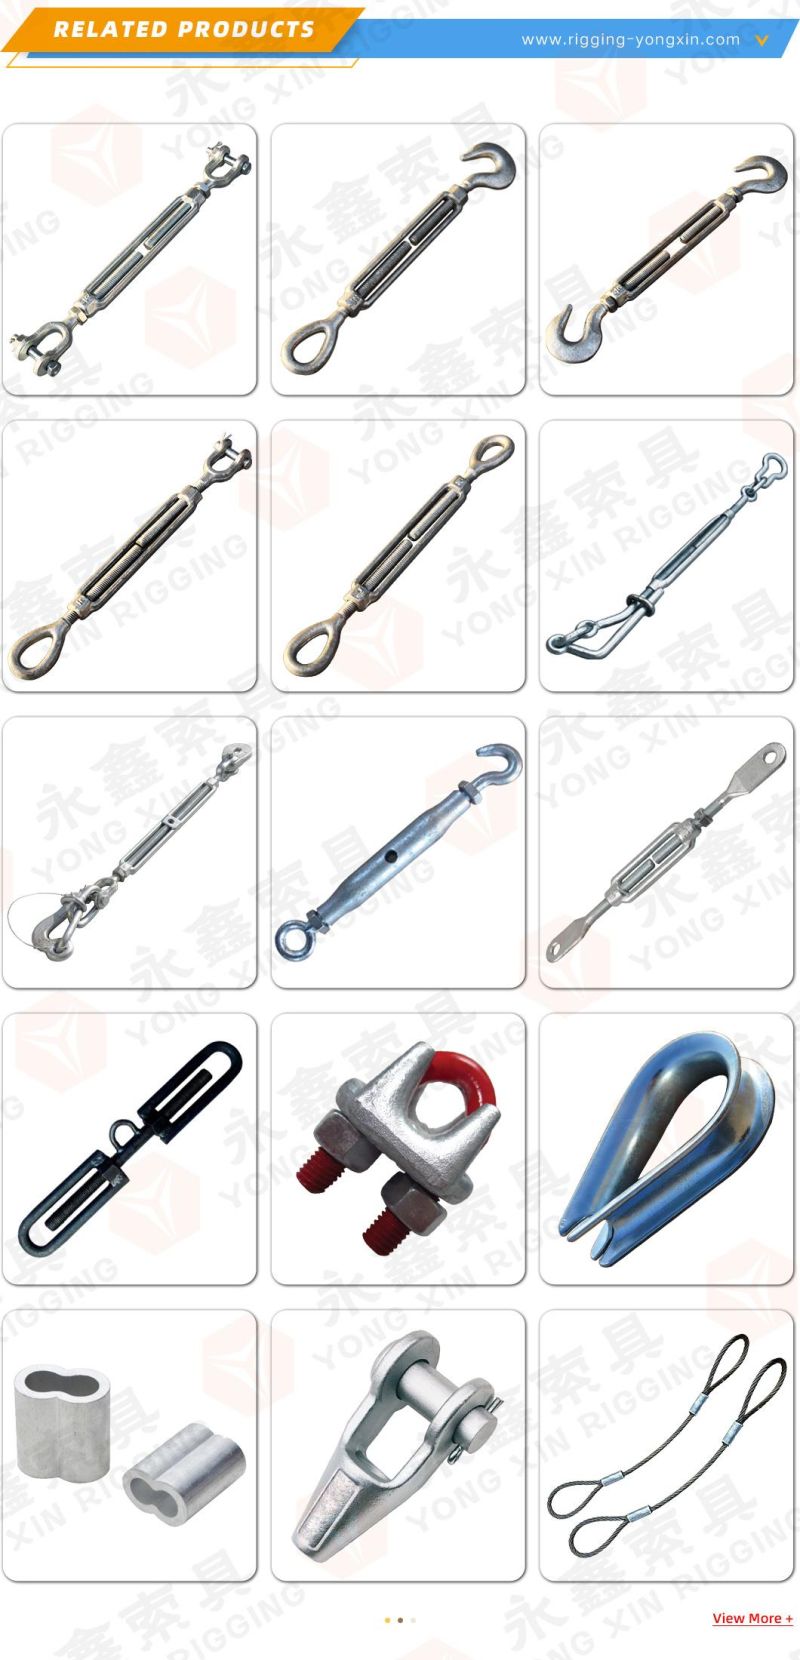 Rigging Forged Hardware Carbon Steel Turnbuckle Jaw/Eye Connection Role Self-Colored, Galvanized Turnbuckle